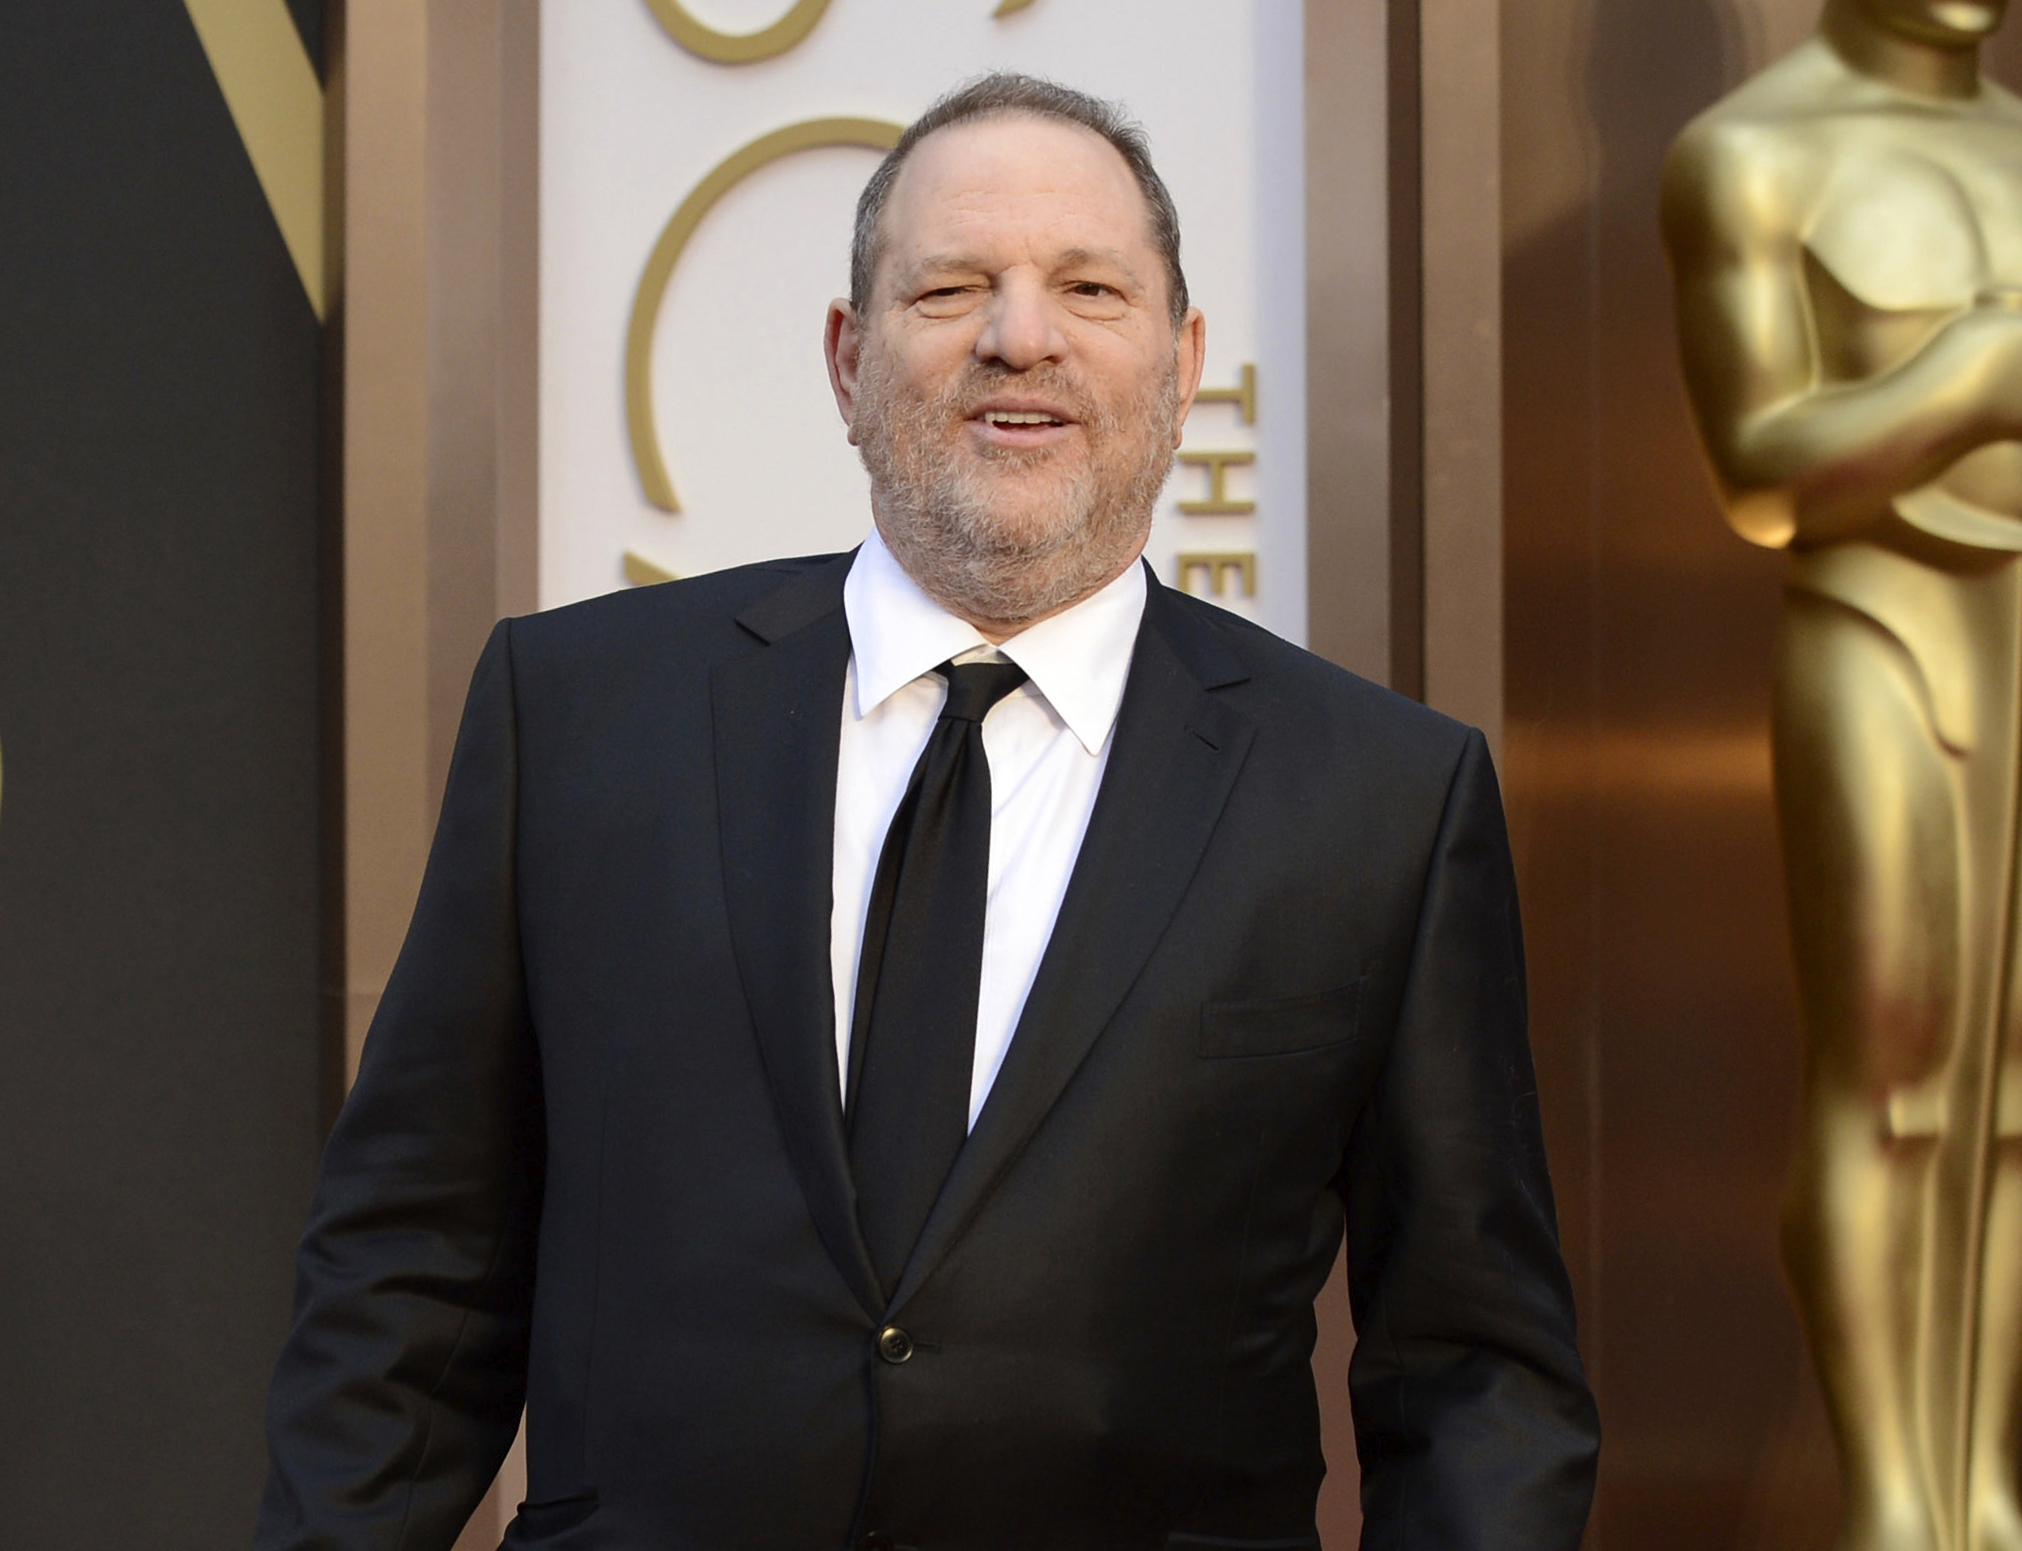 FILE - Movie mogul Harvey Weinstein arrives at the Oscars at the Dolby Theatre in Los Angeles, March 2, 2014. Opening statements are set to begin Monday in the disgraced movie mogul Harvey Weinstein's Los Angeles rape and sexual assault trial. Weinstein is already serving a 23-year-old sentence for a conviction in New York. (Photo by Jordan Strauss/Invision/AP, File)